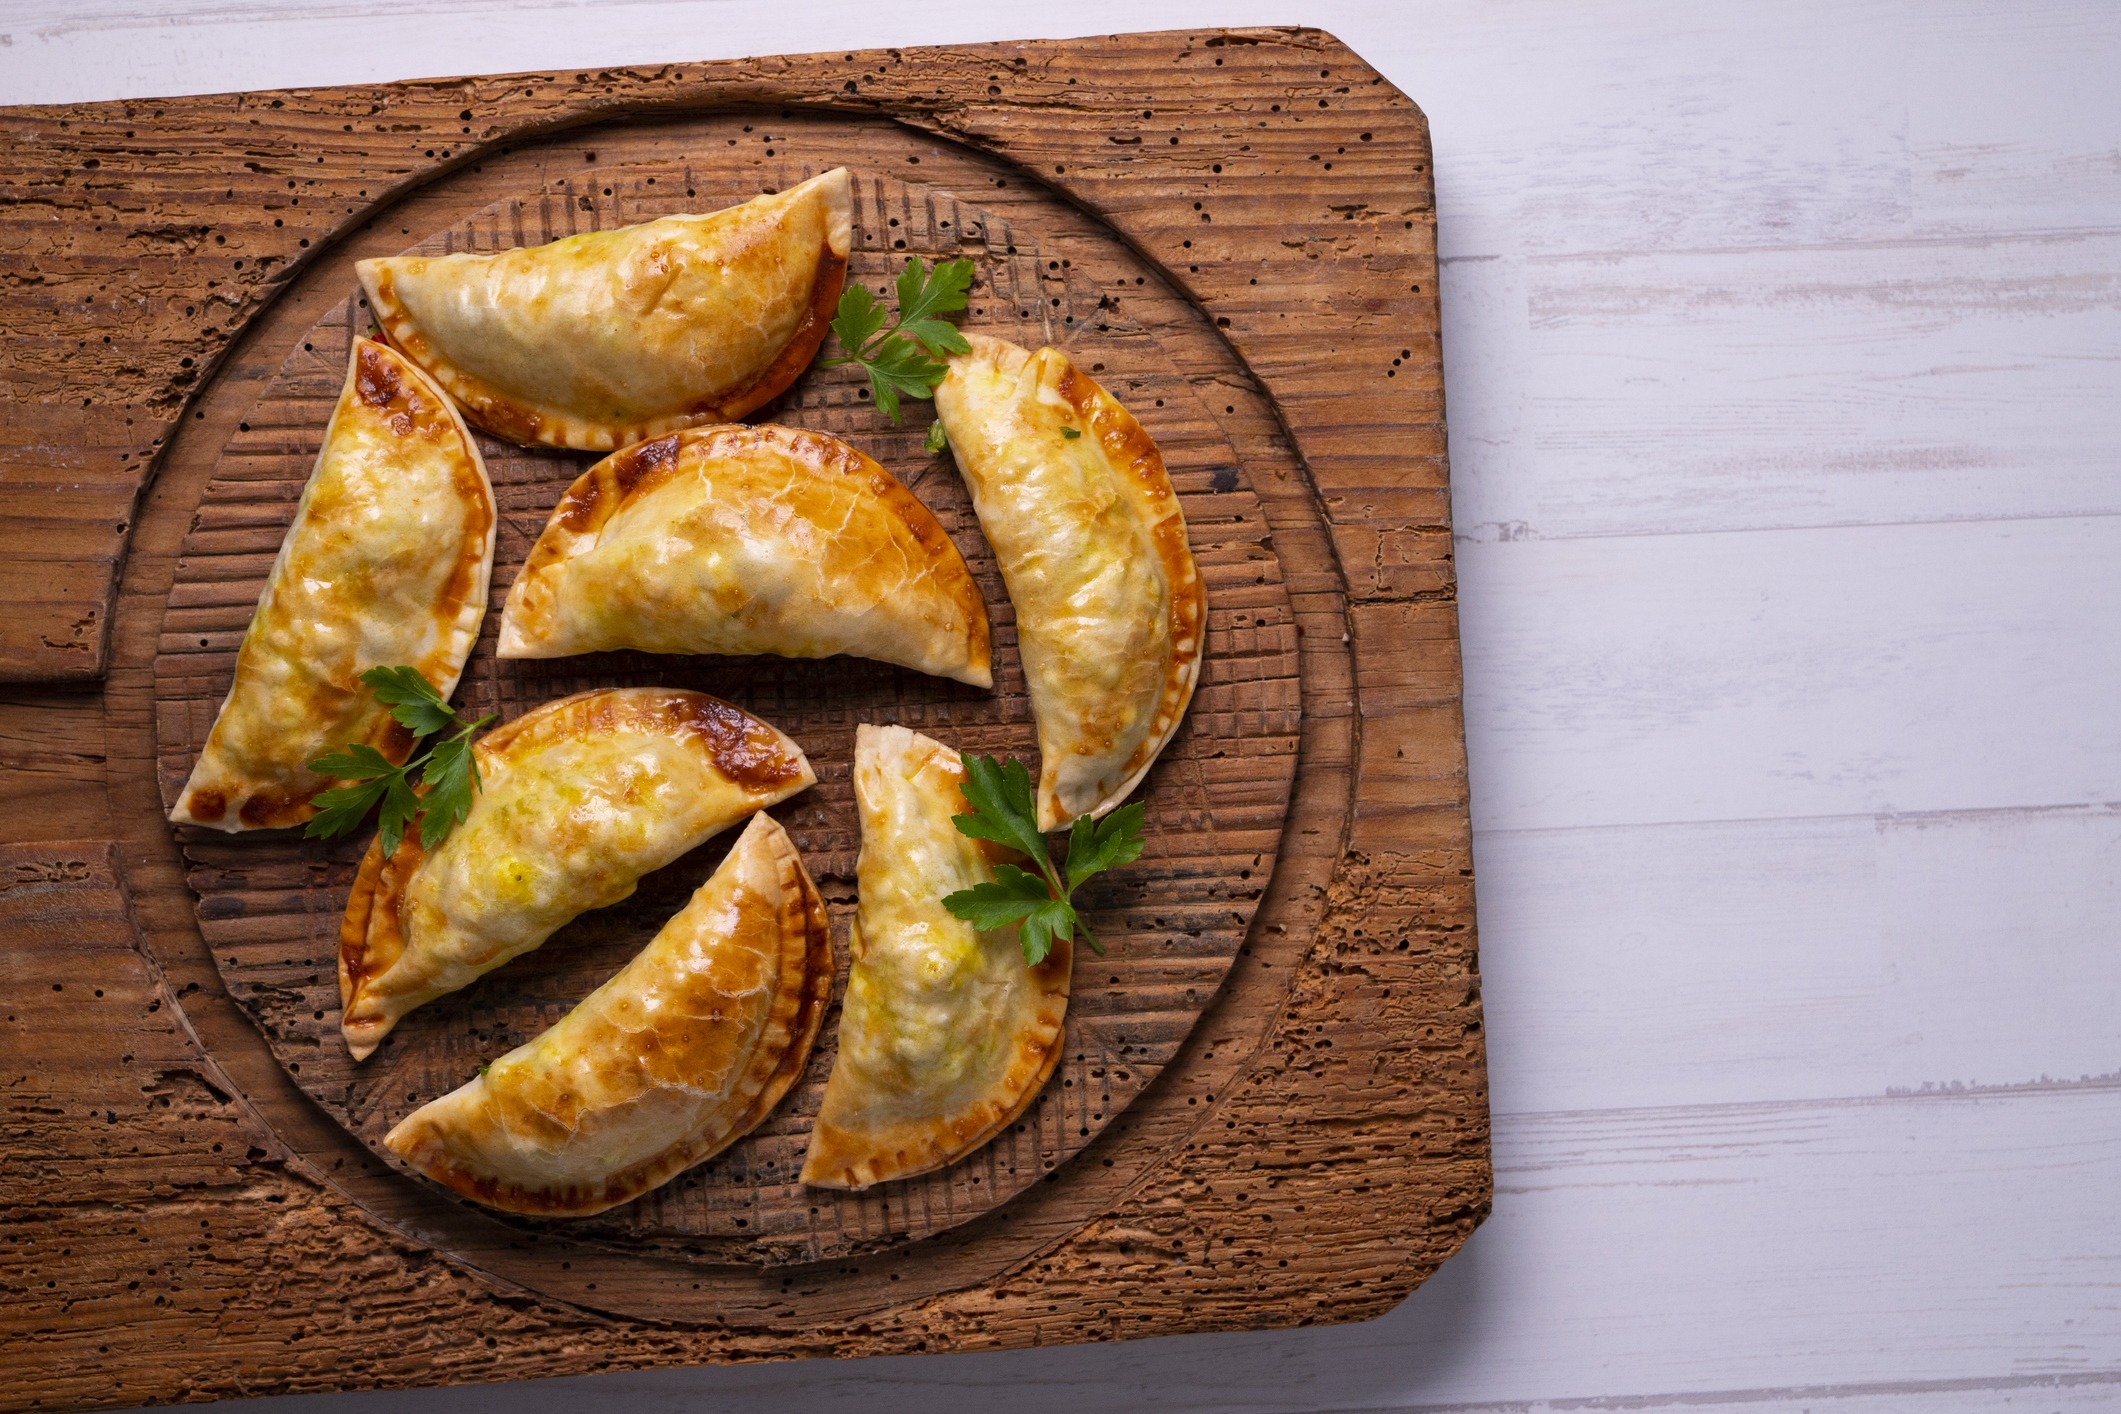 Empanadas - hand held pastries stuffed with corned beef, cabbage, carrots, potatoes and Swiss cheese for St. Patrick's Day. Garnished with parsley and sitting on a brown wooden serving board.